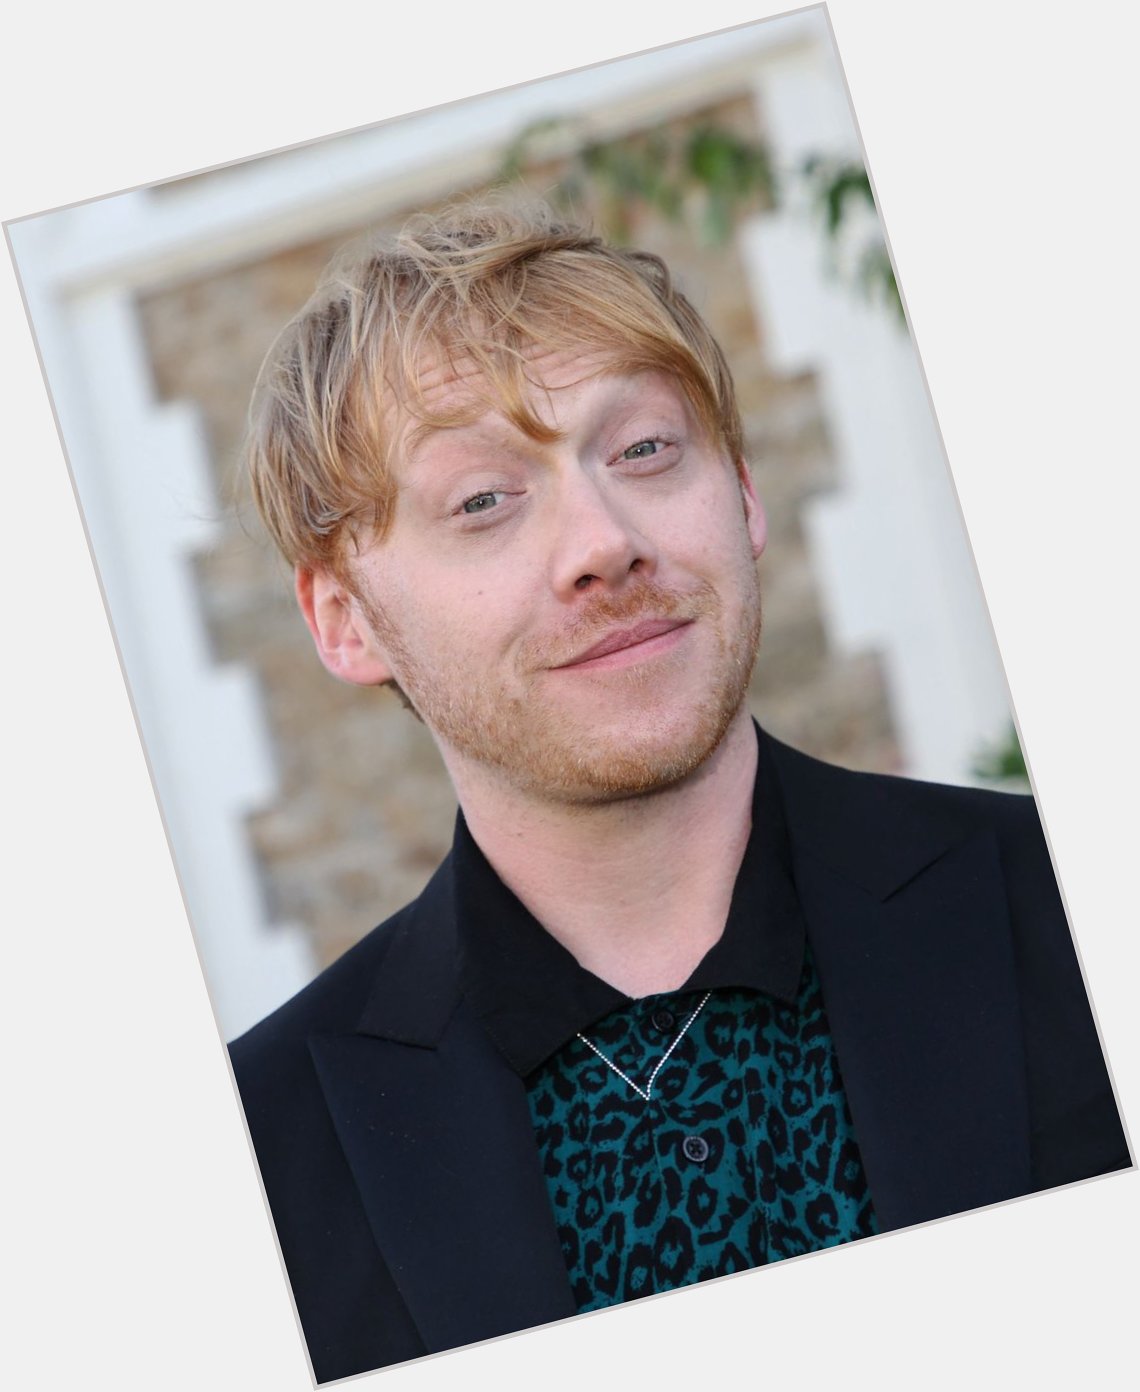  Happy birthday to Rupert Grint who portrayed Ronald Weasley in the films! 